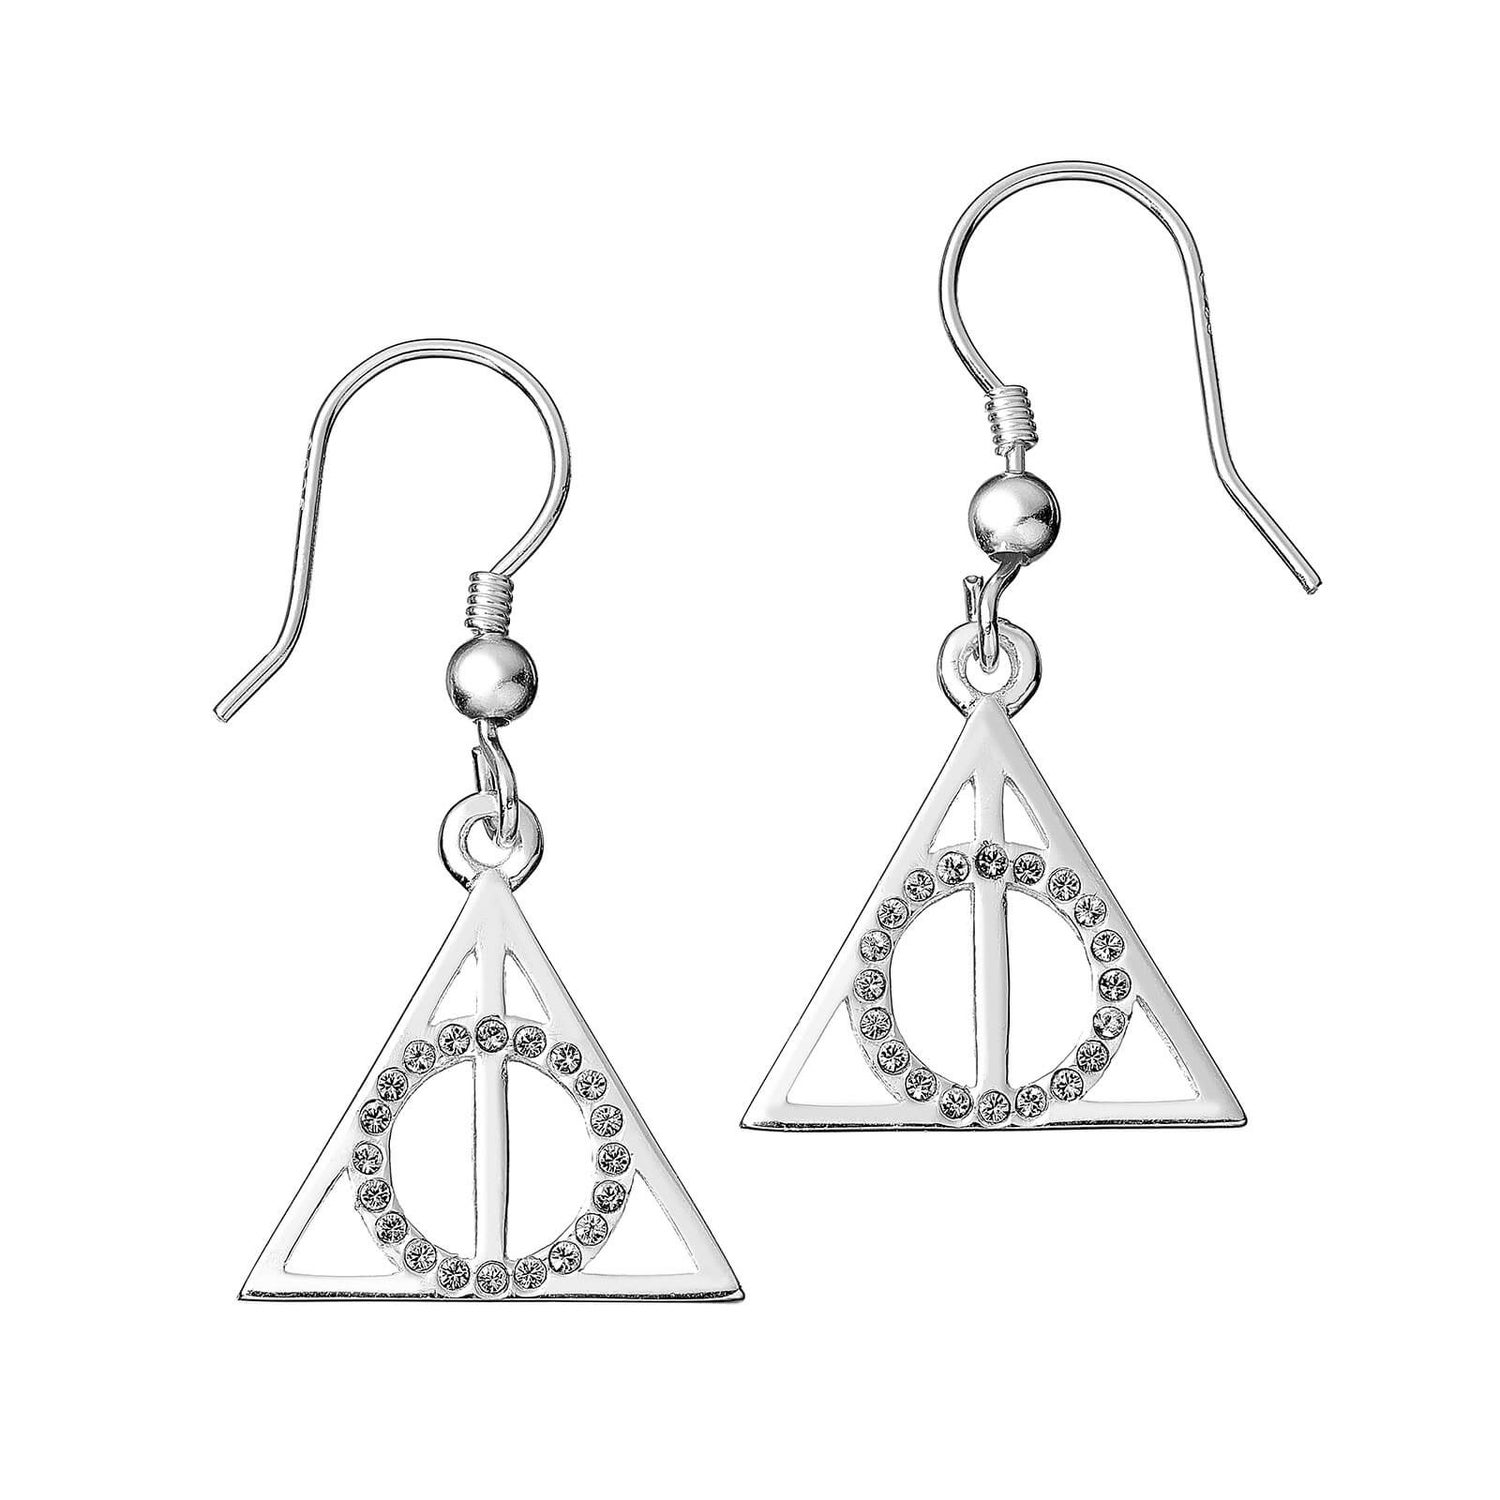 Harry Potter Deathly Hallows Earrings Embellished with Crystals - Silver